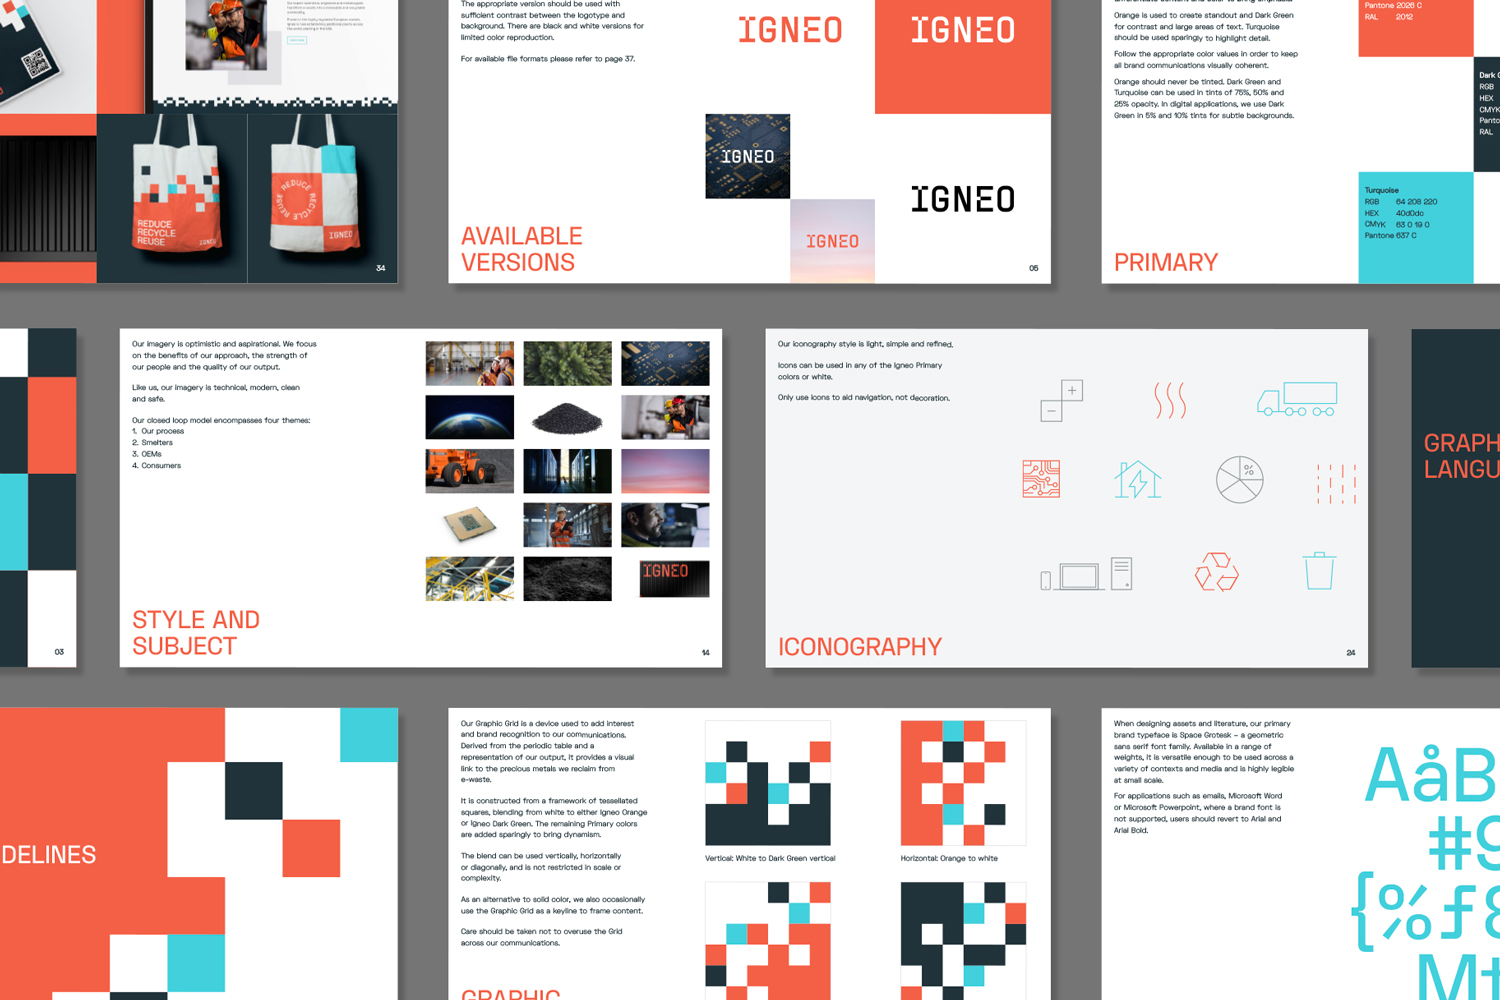 Brand guidelines created by a visual identity agency